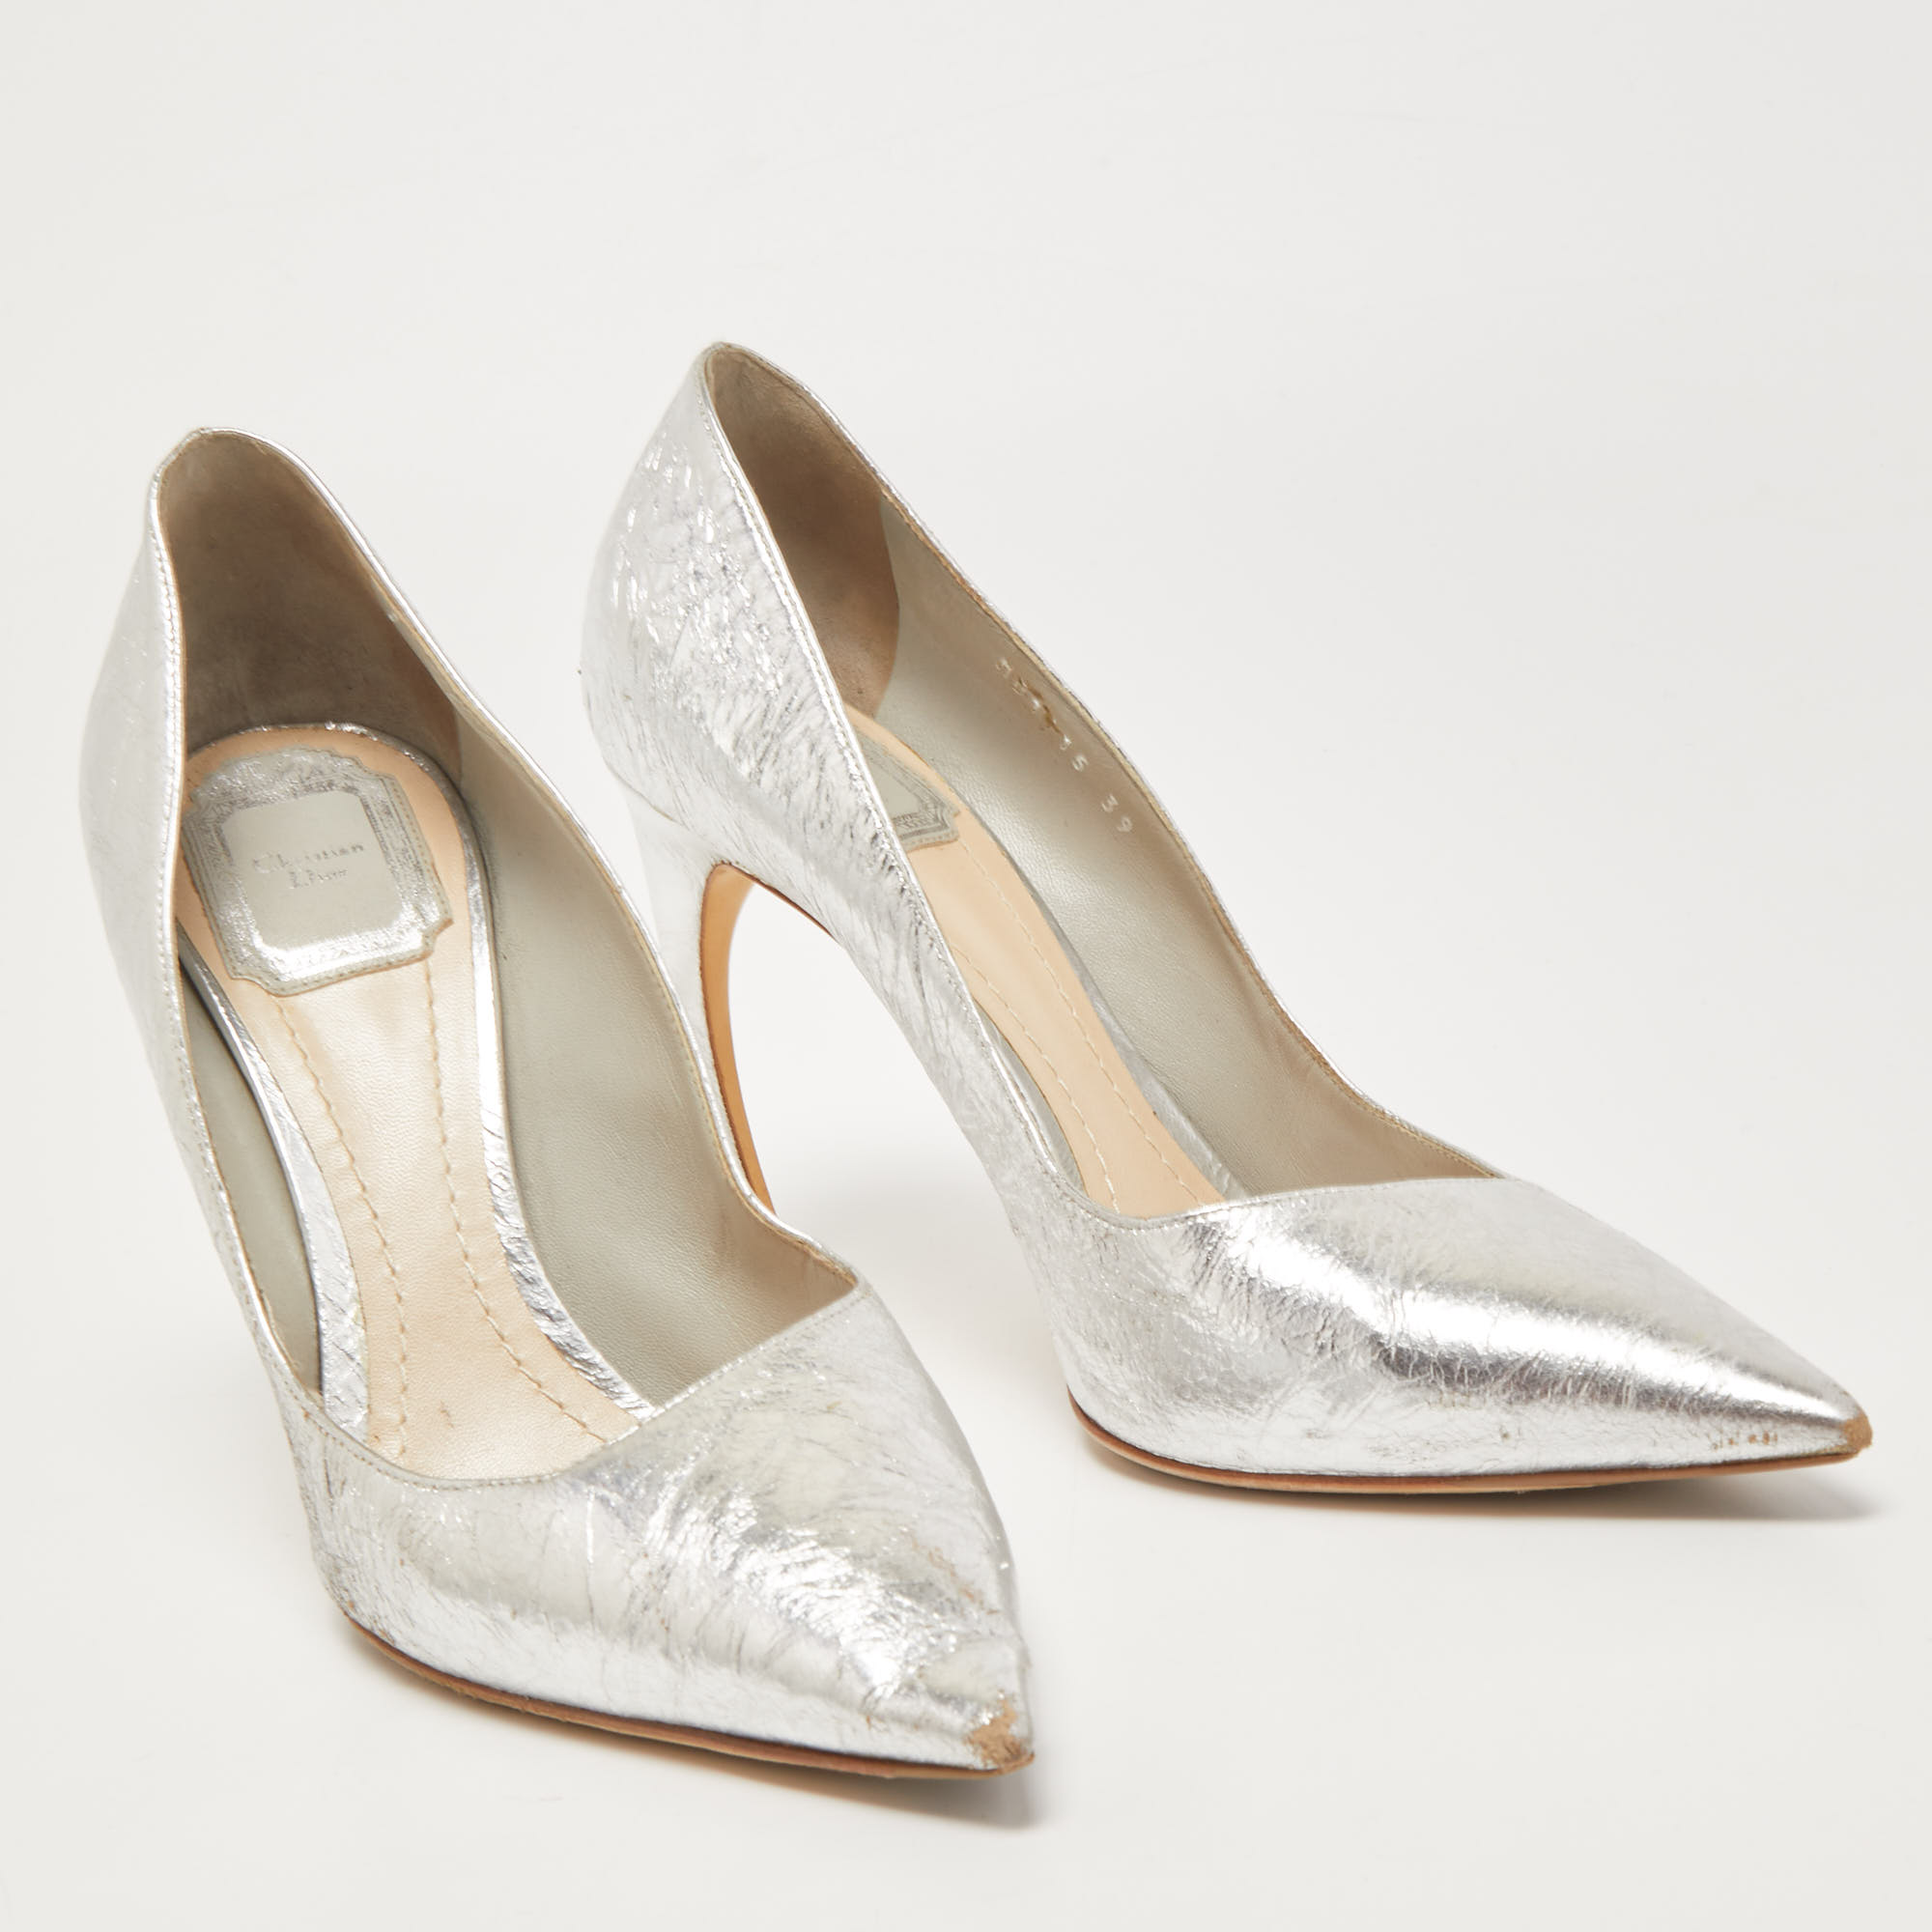 Dior Silver Crinkled Leather Pointed Toe Pumps Size 39